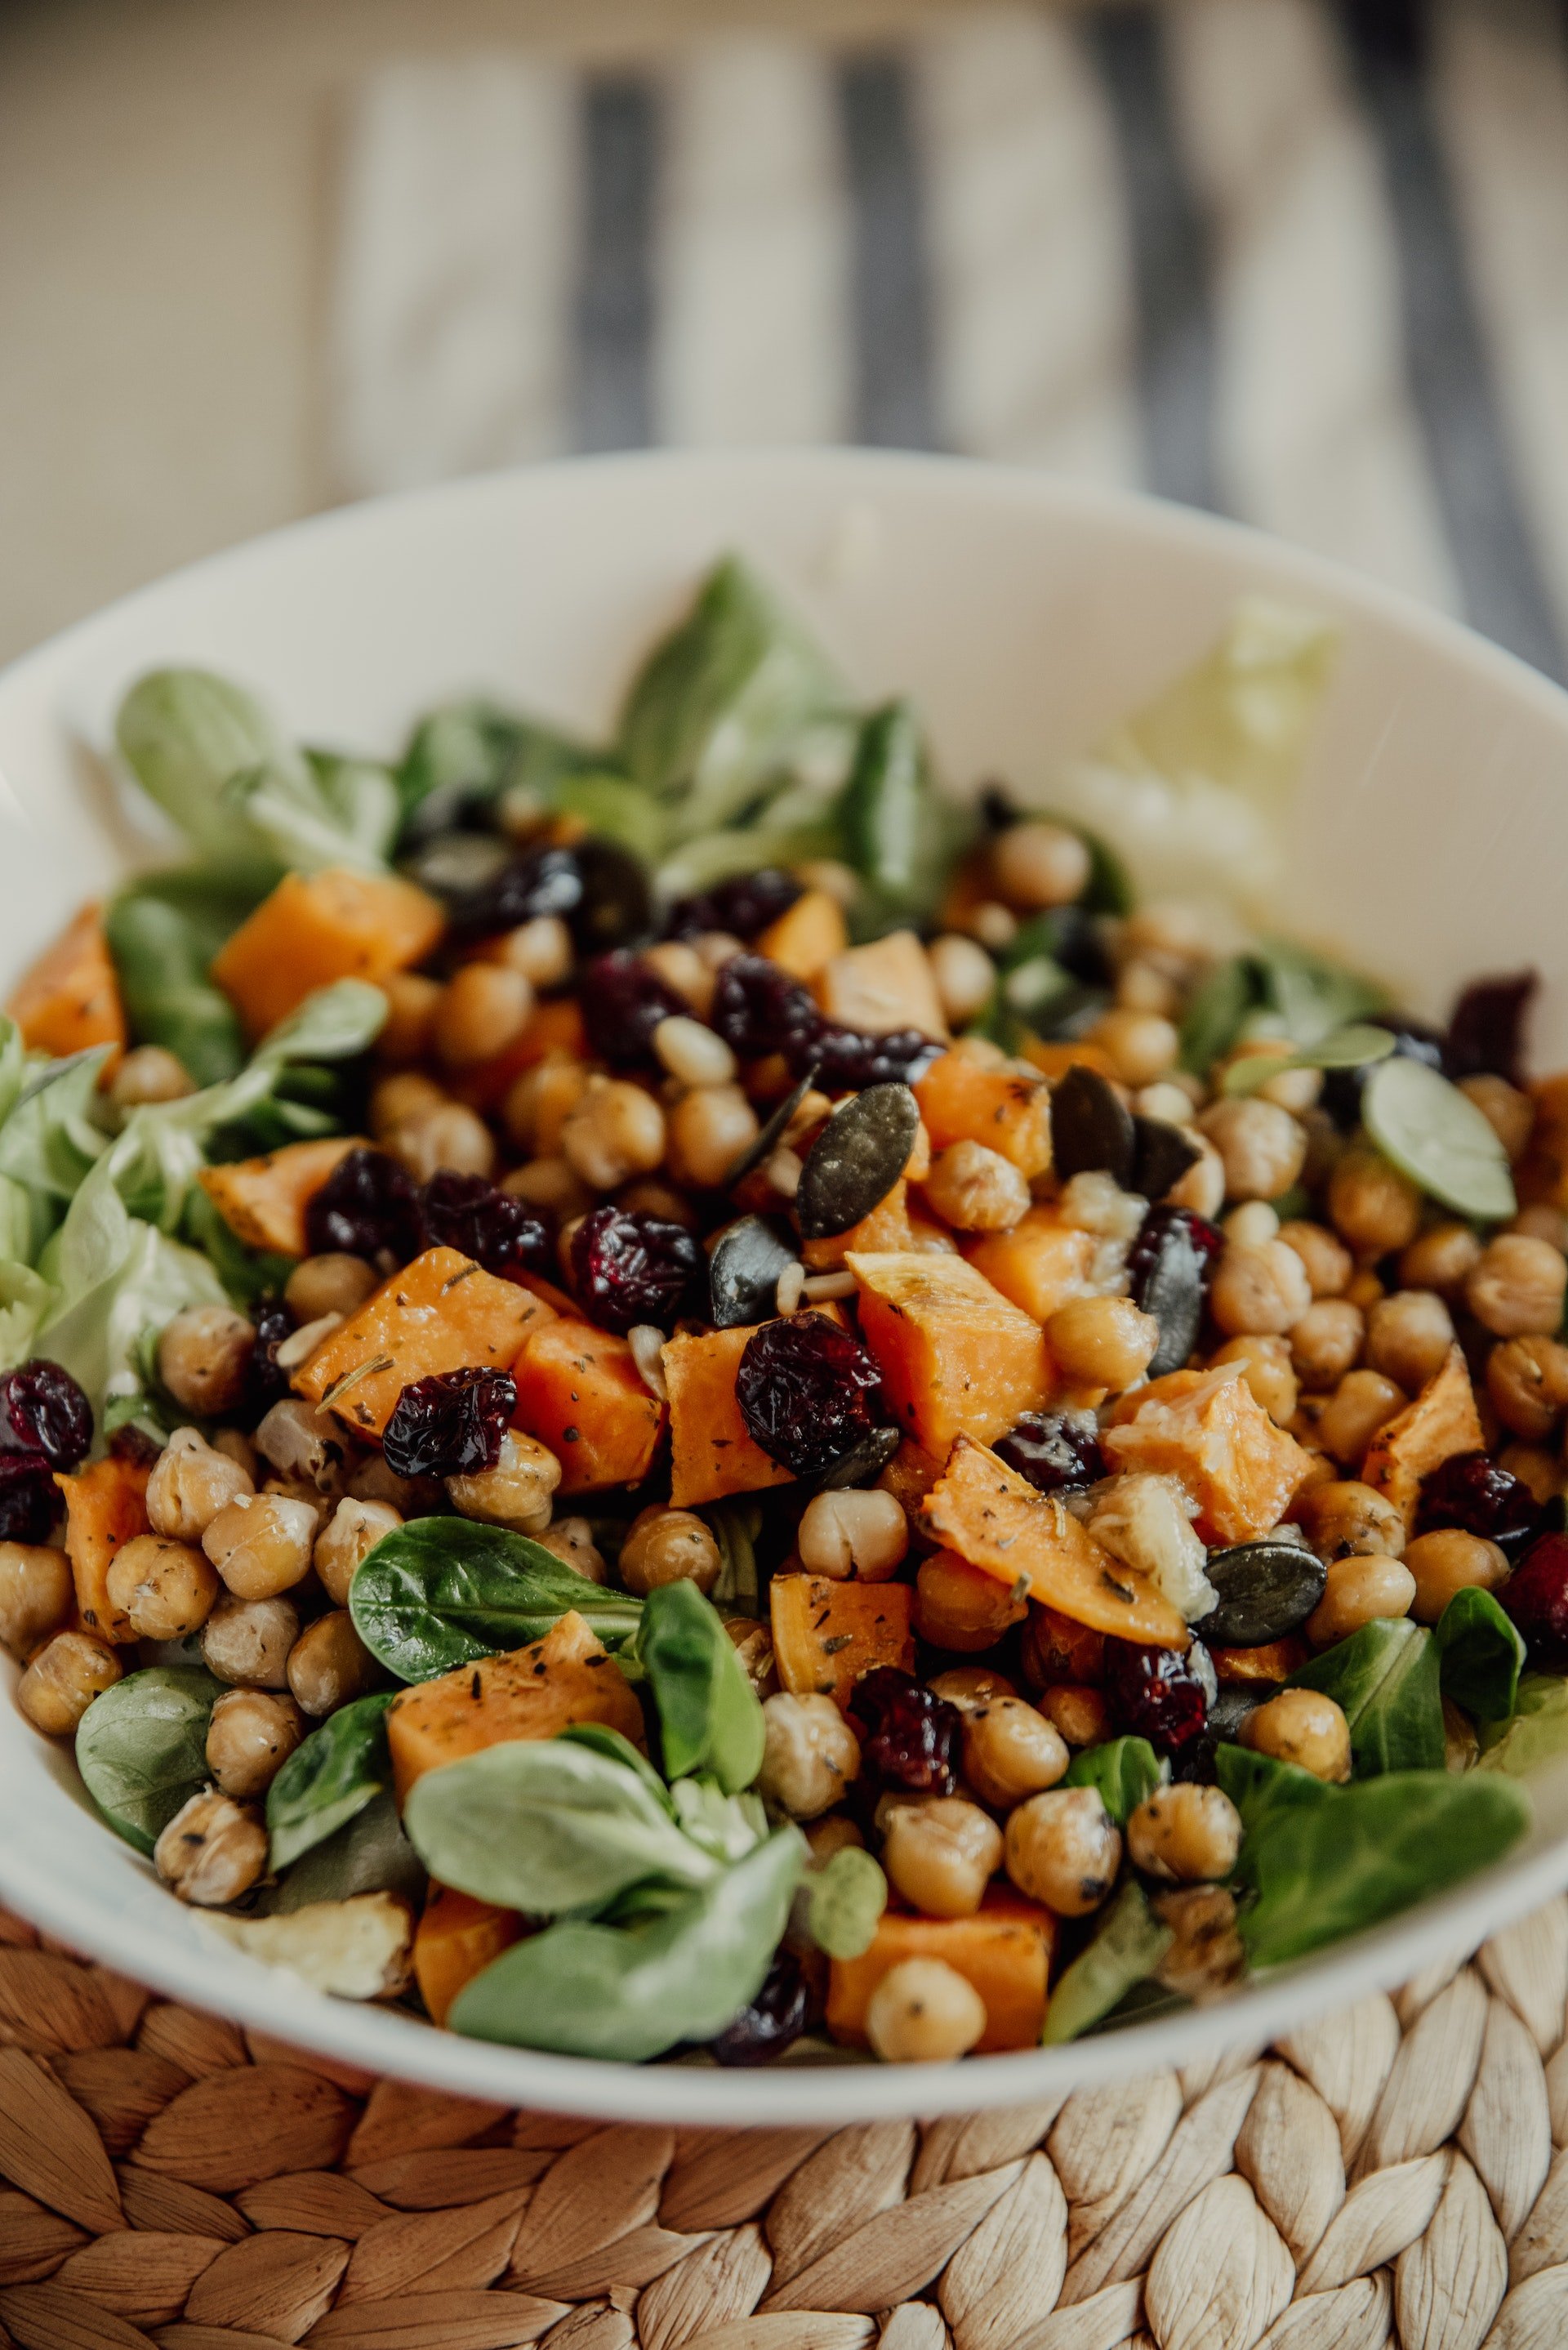 Creating Harmony and Well-Being: My Core Health Aim for the Month Colorful+Baby+Spinach+Salad+with+Chickpeas+and+Roasted+Sweet+Potatoes +A+Healthy+and+Nourishing+Meal+under+30+Minutes